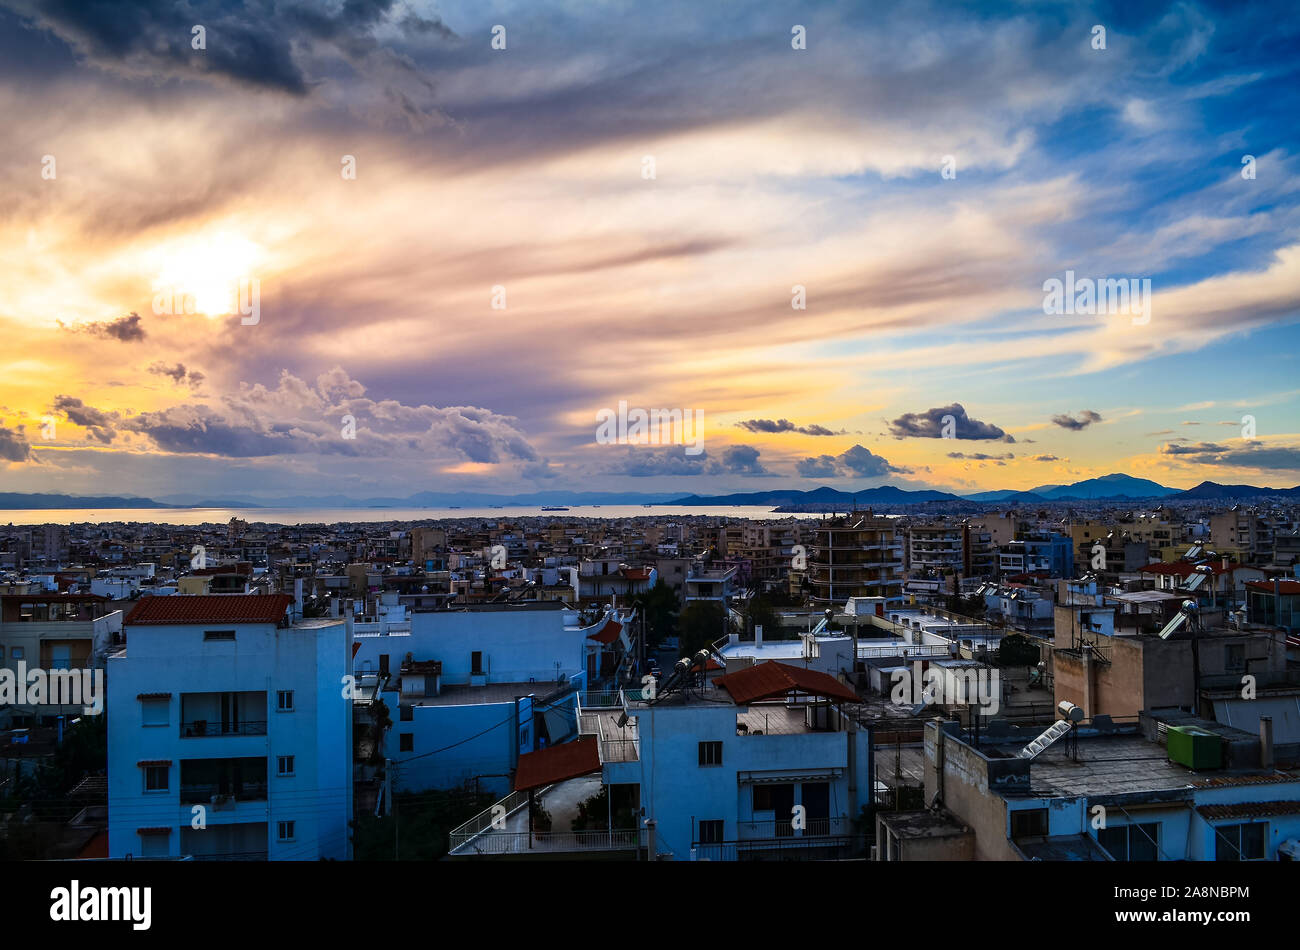 Amazing aerial view over Athens city, Greece during winter season at sunset. Stock Photo